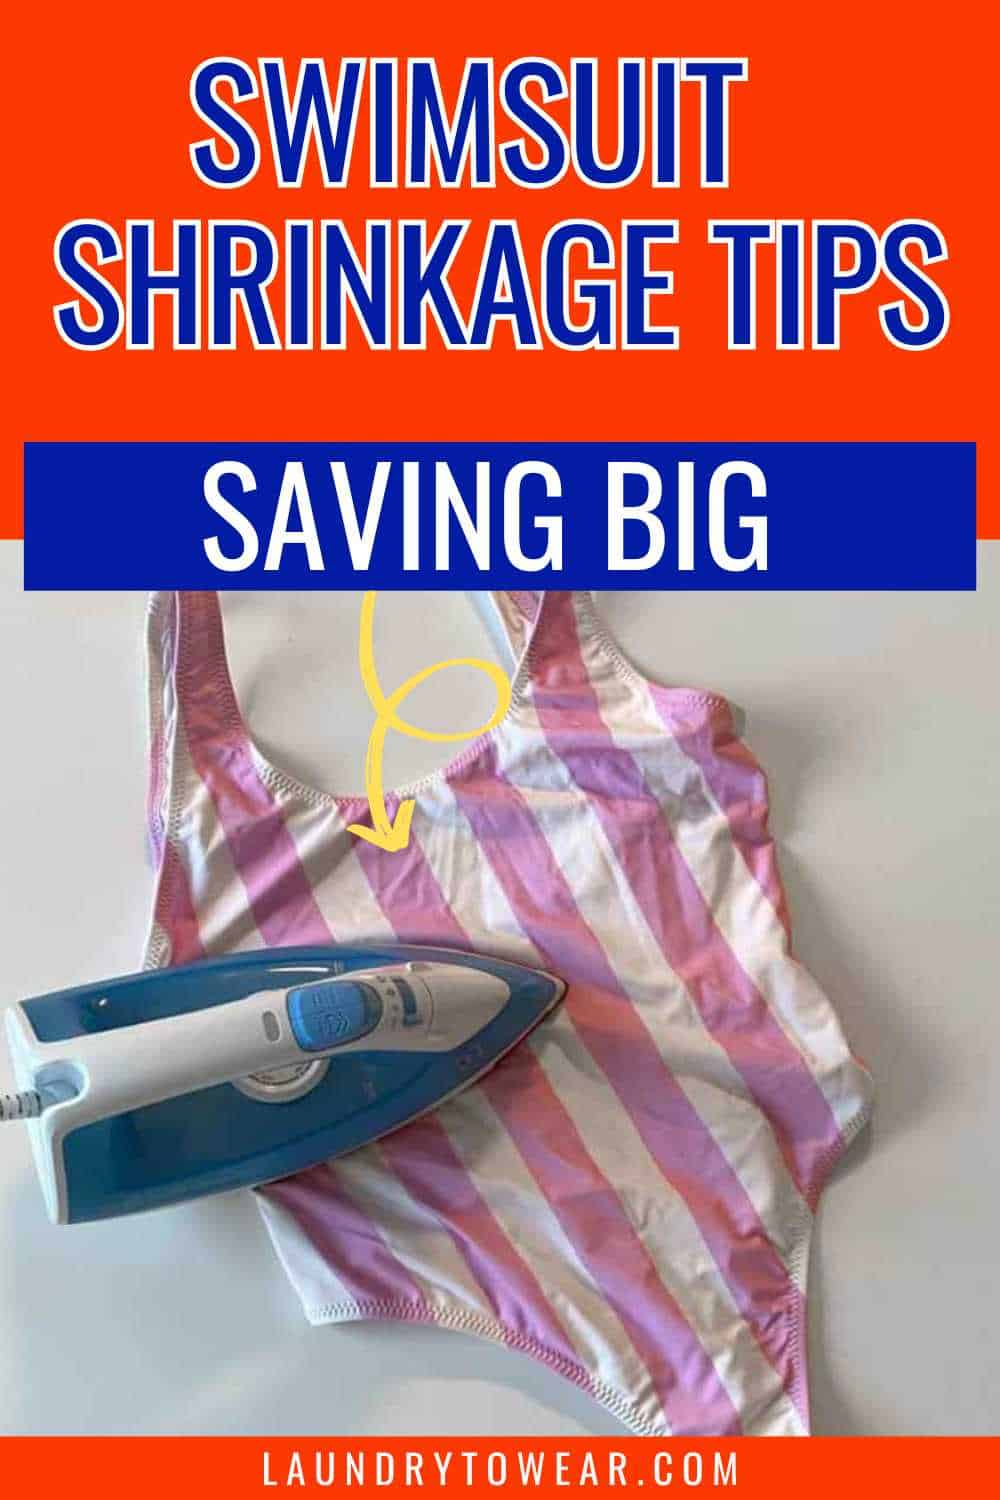 Can Swimsuits Shrink In The Dryer? » Savoteur